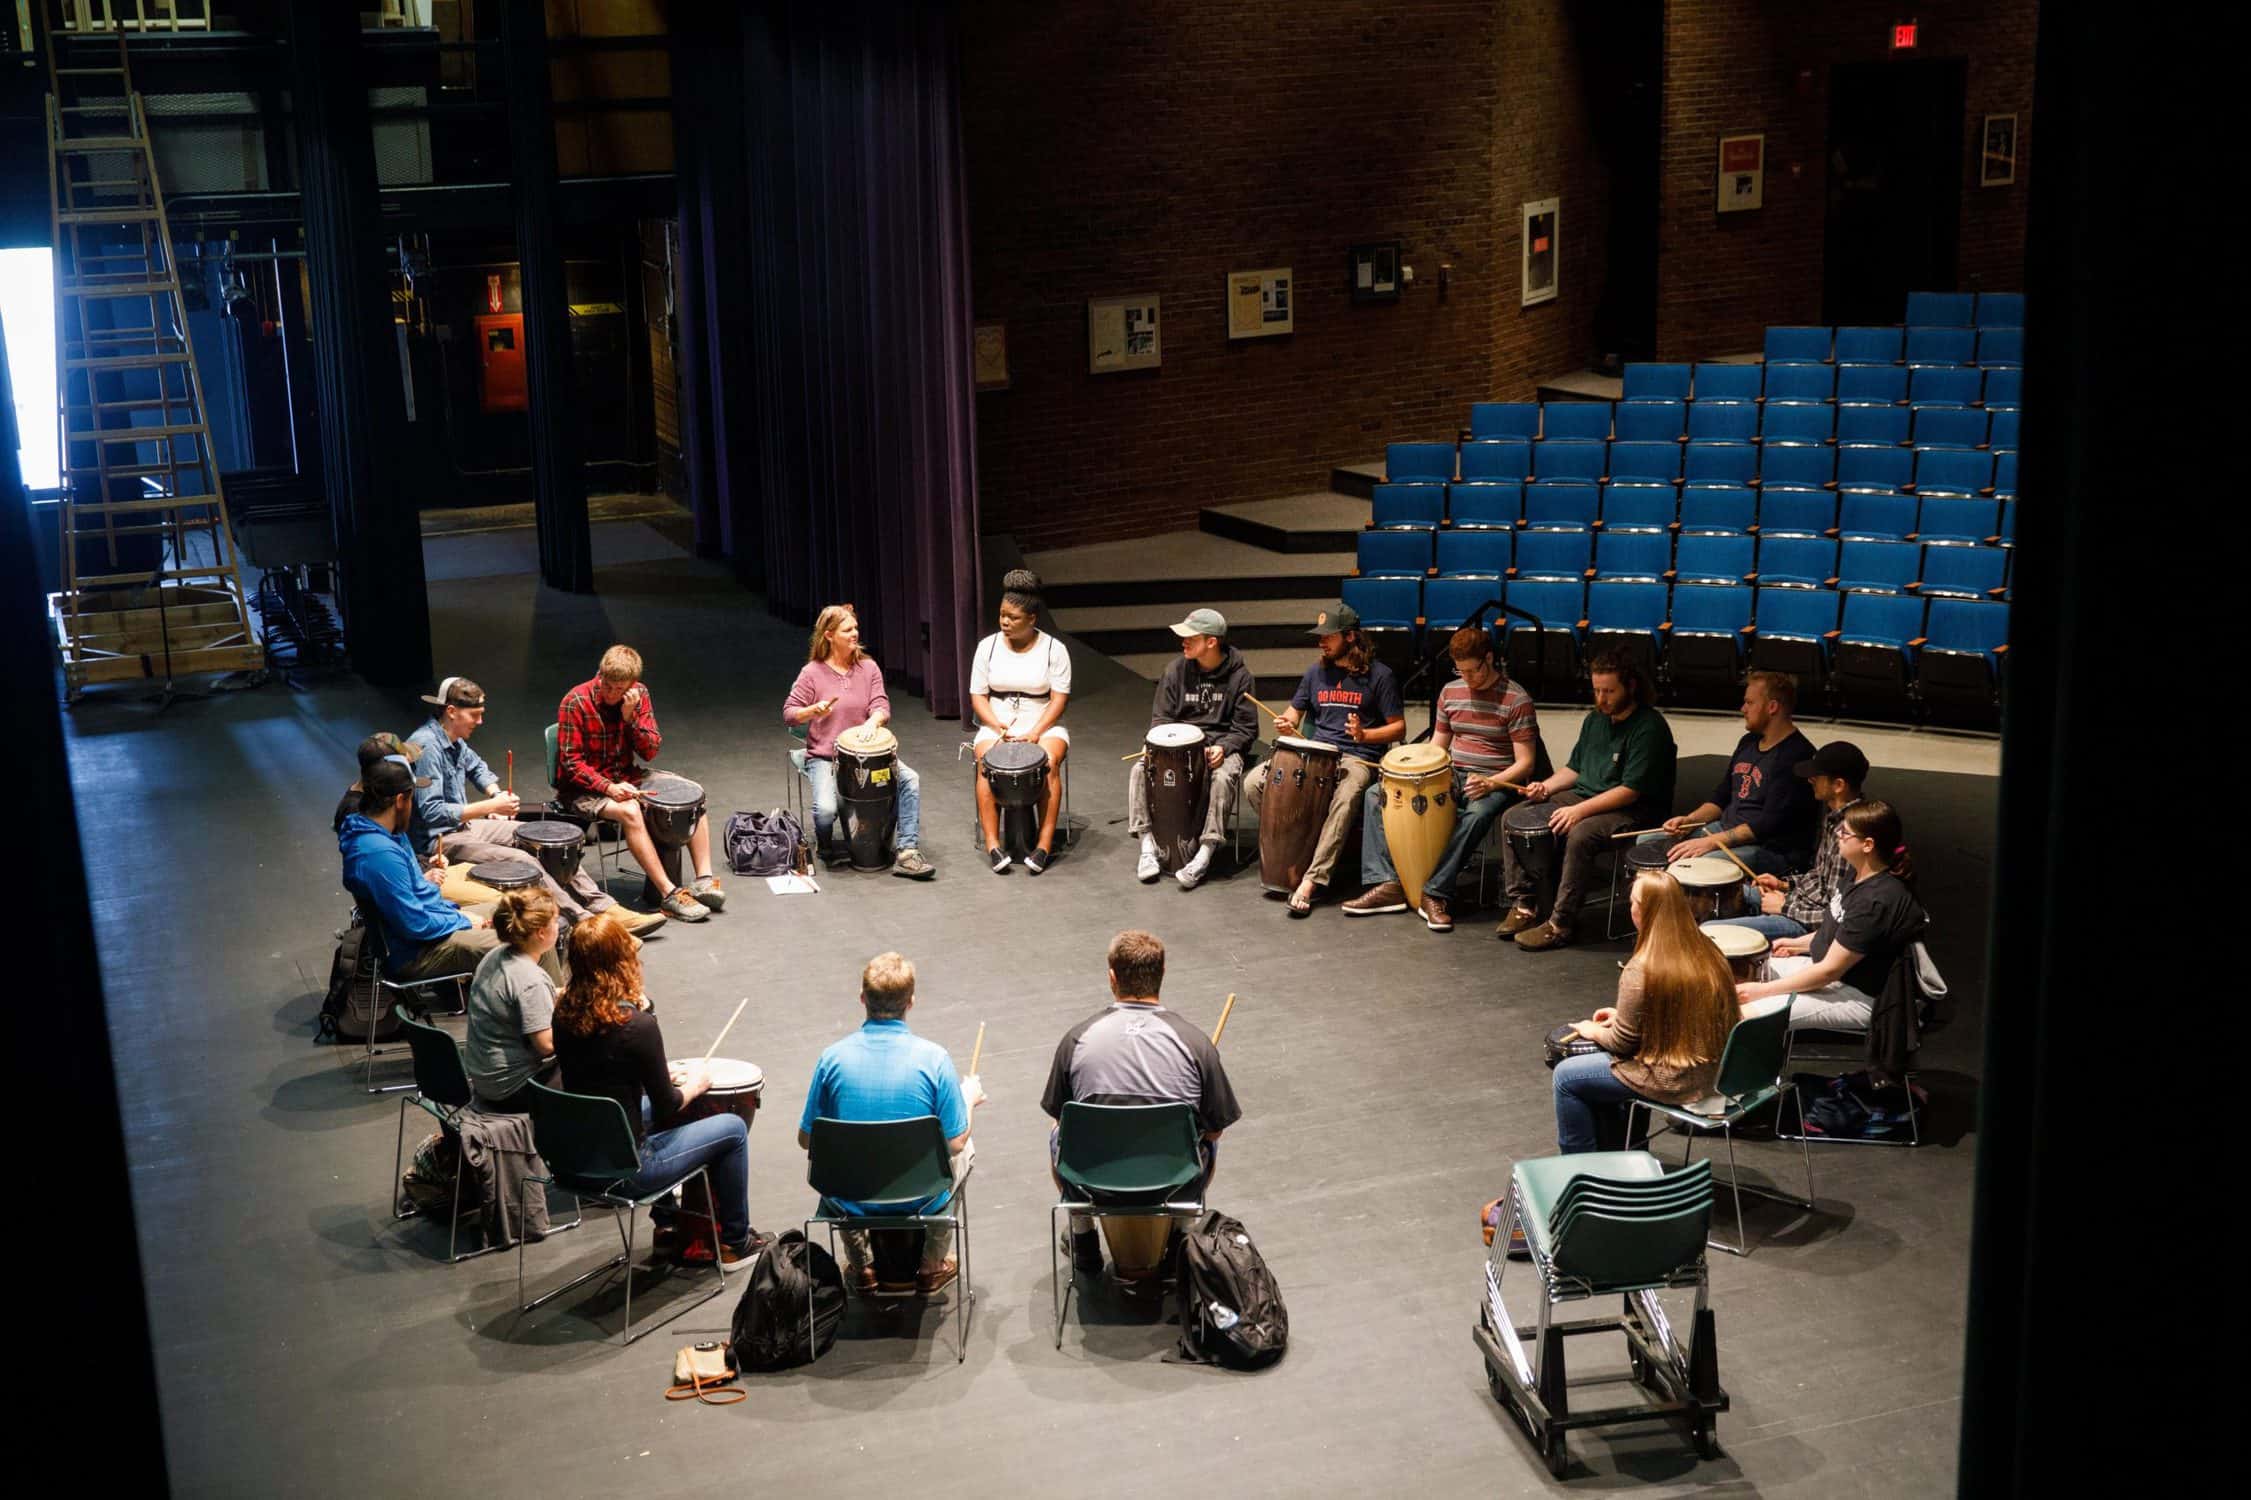 On the stage, students gather in a circle with drums